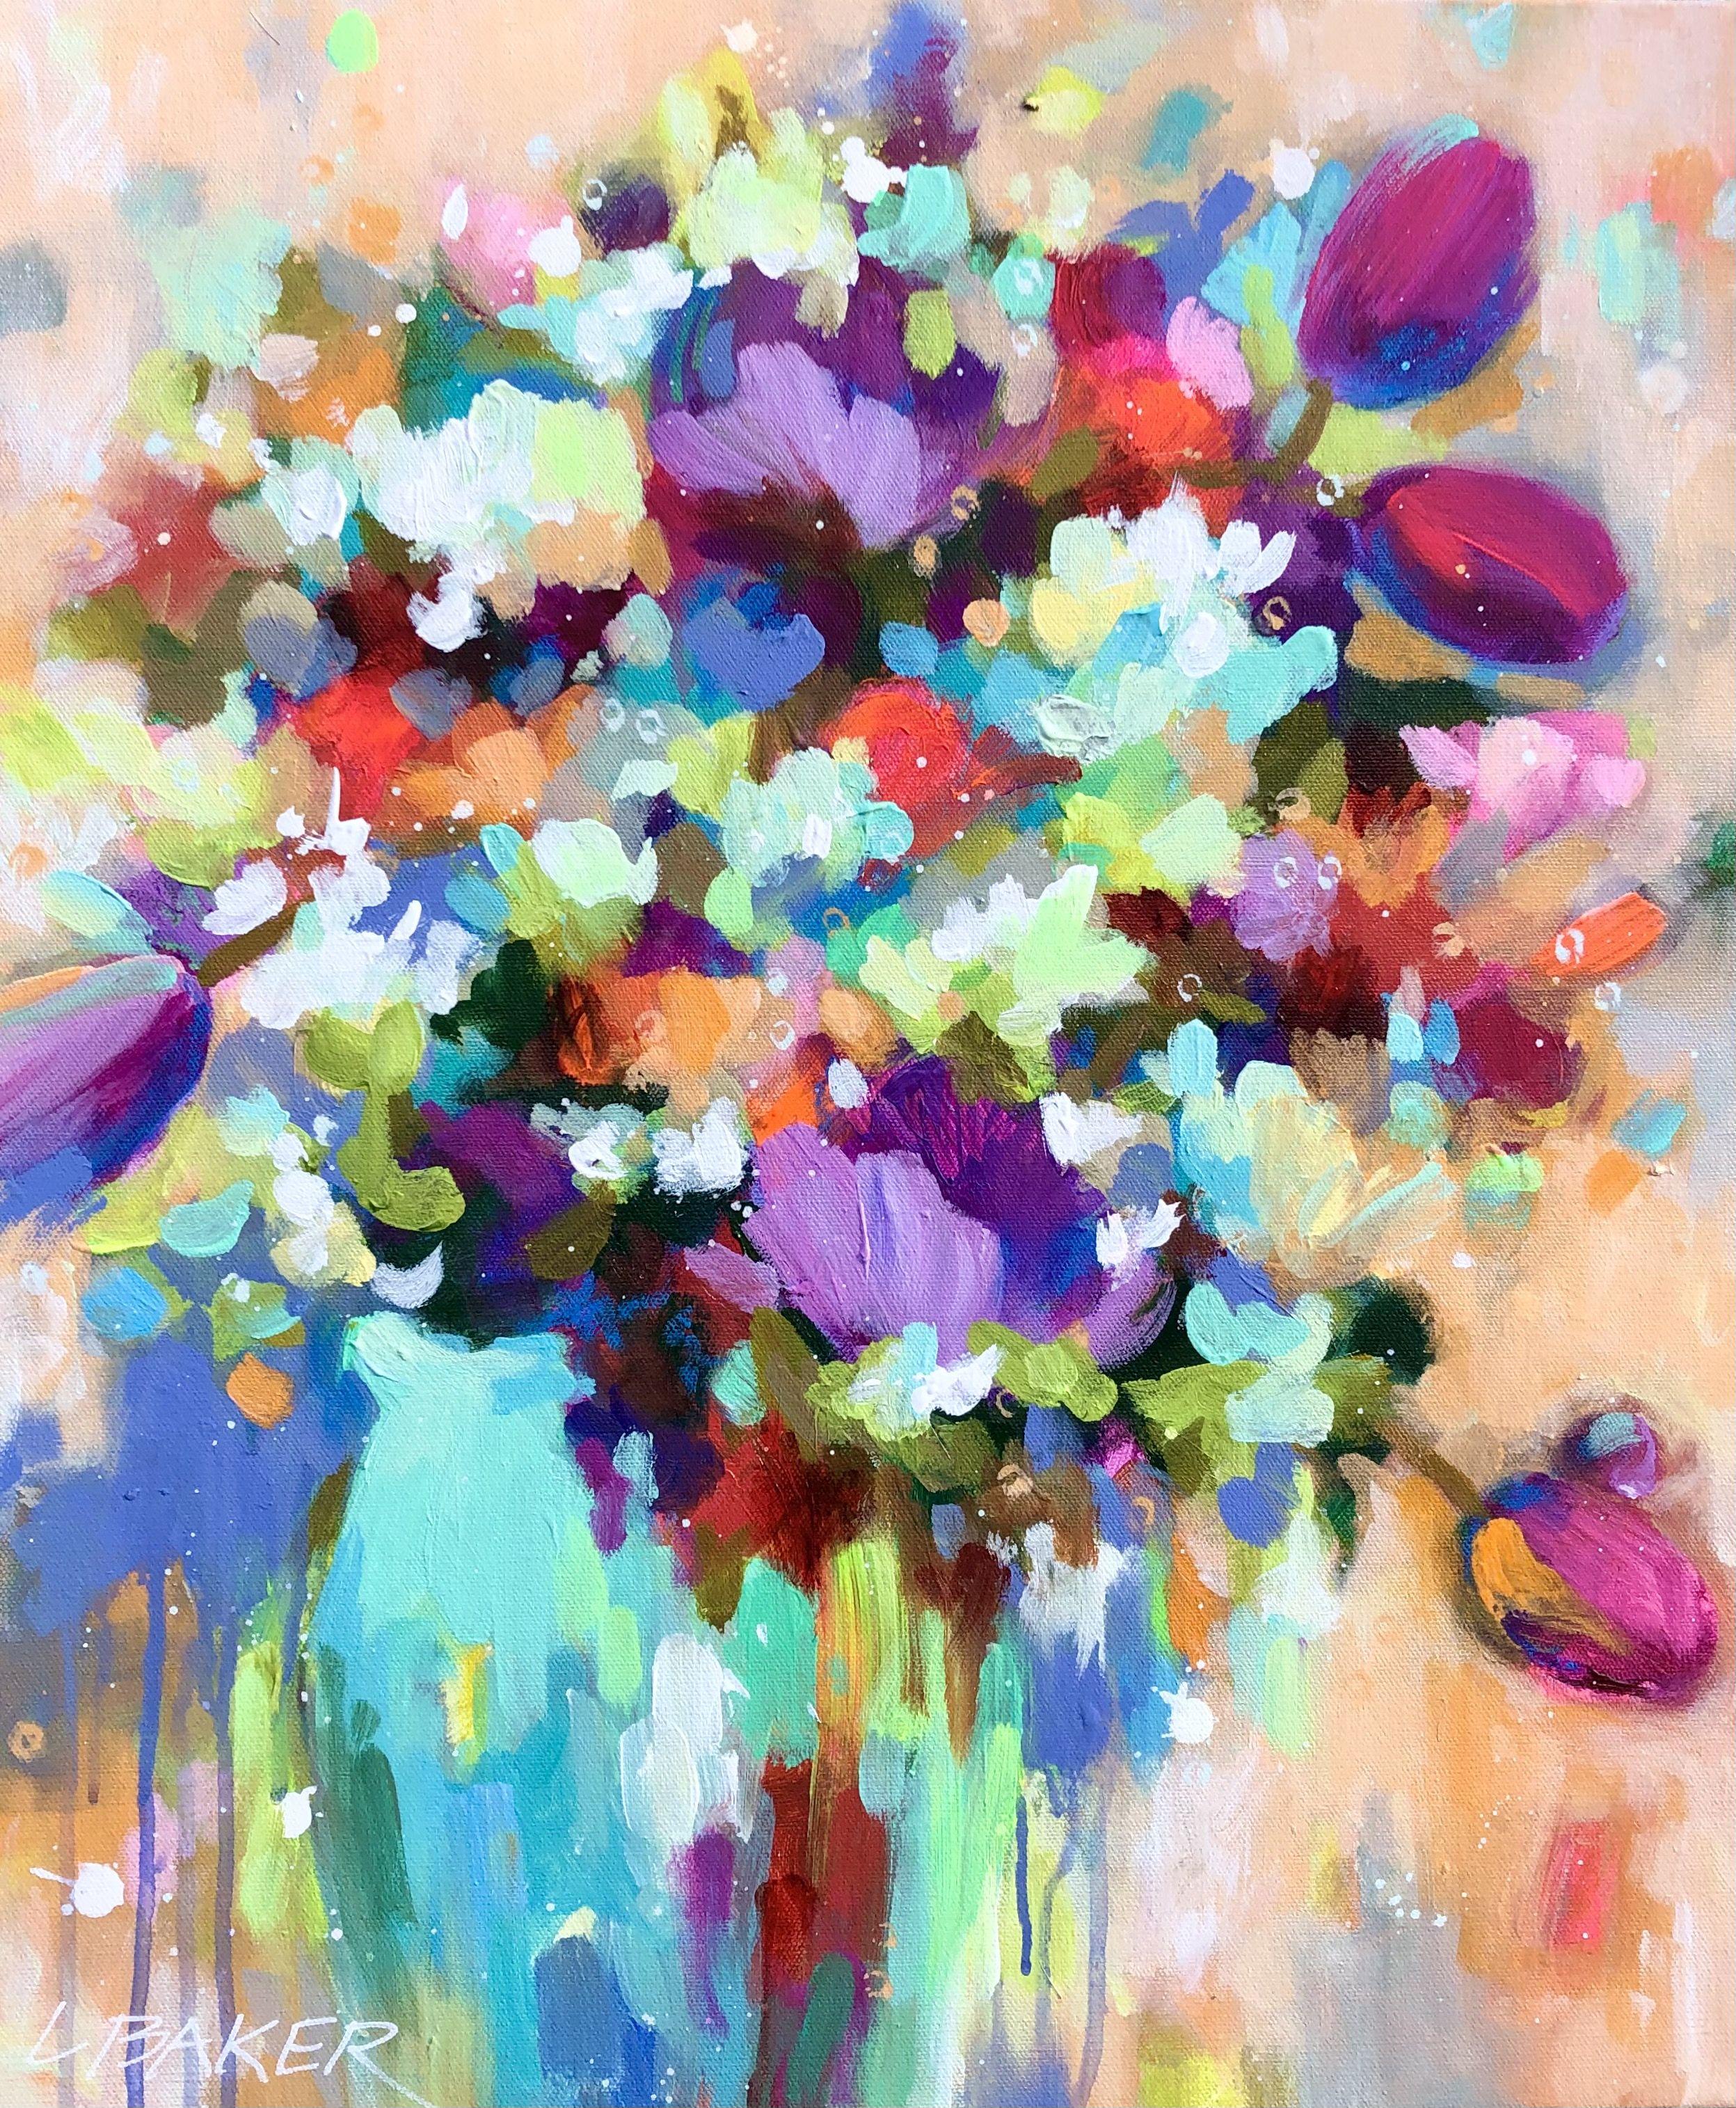 Colourful expressive abstracted floral. It is bold but gentle, fits perfectly in a contemporary home. Lovely tangerine base combined with aquas and purples.    This is an original signed piece of art. There is always so much more detail and subtle